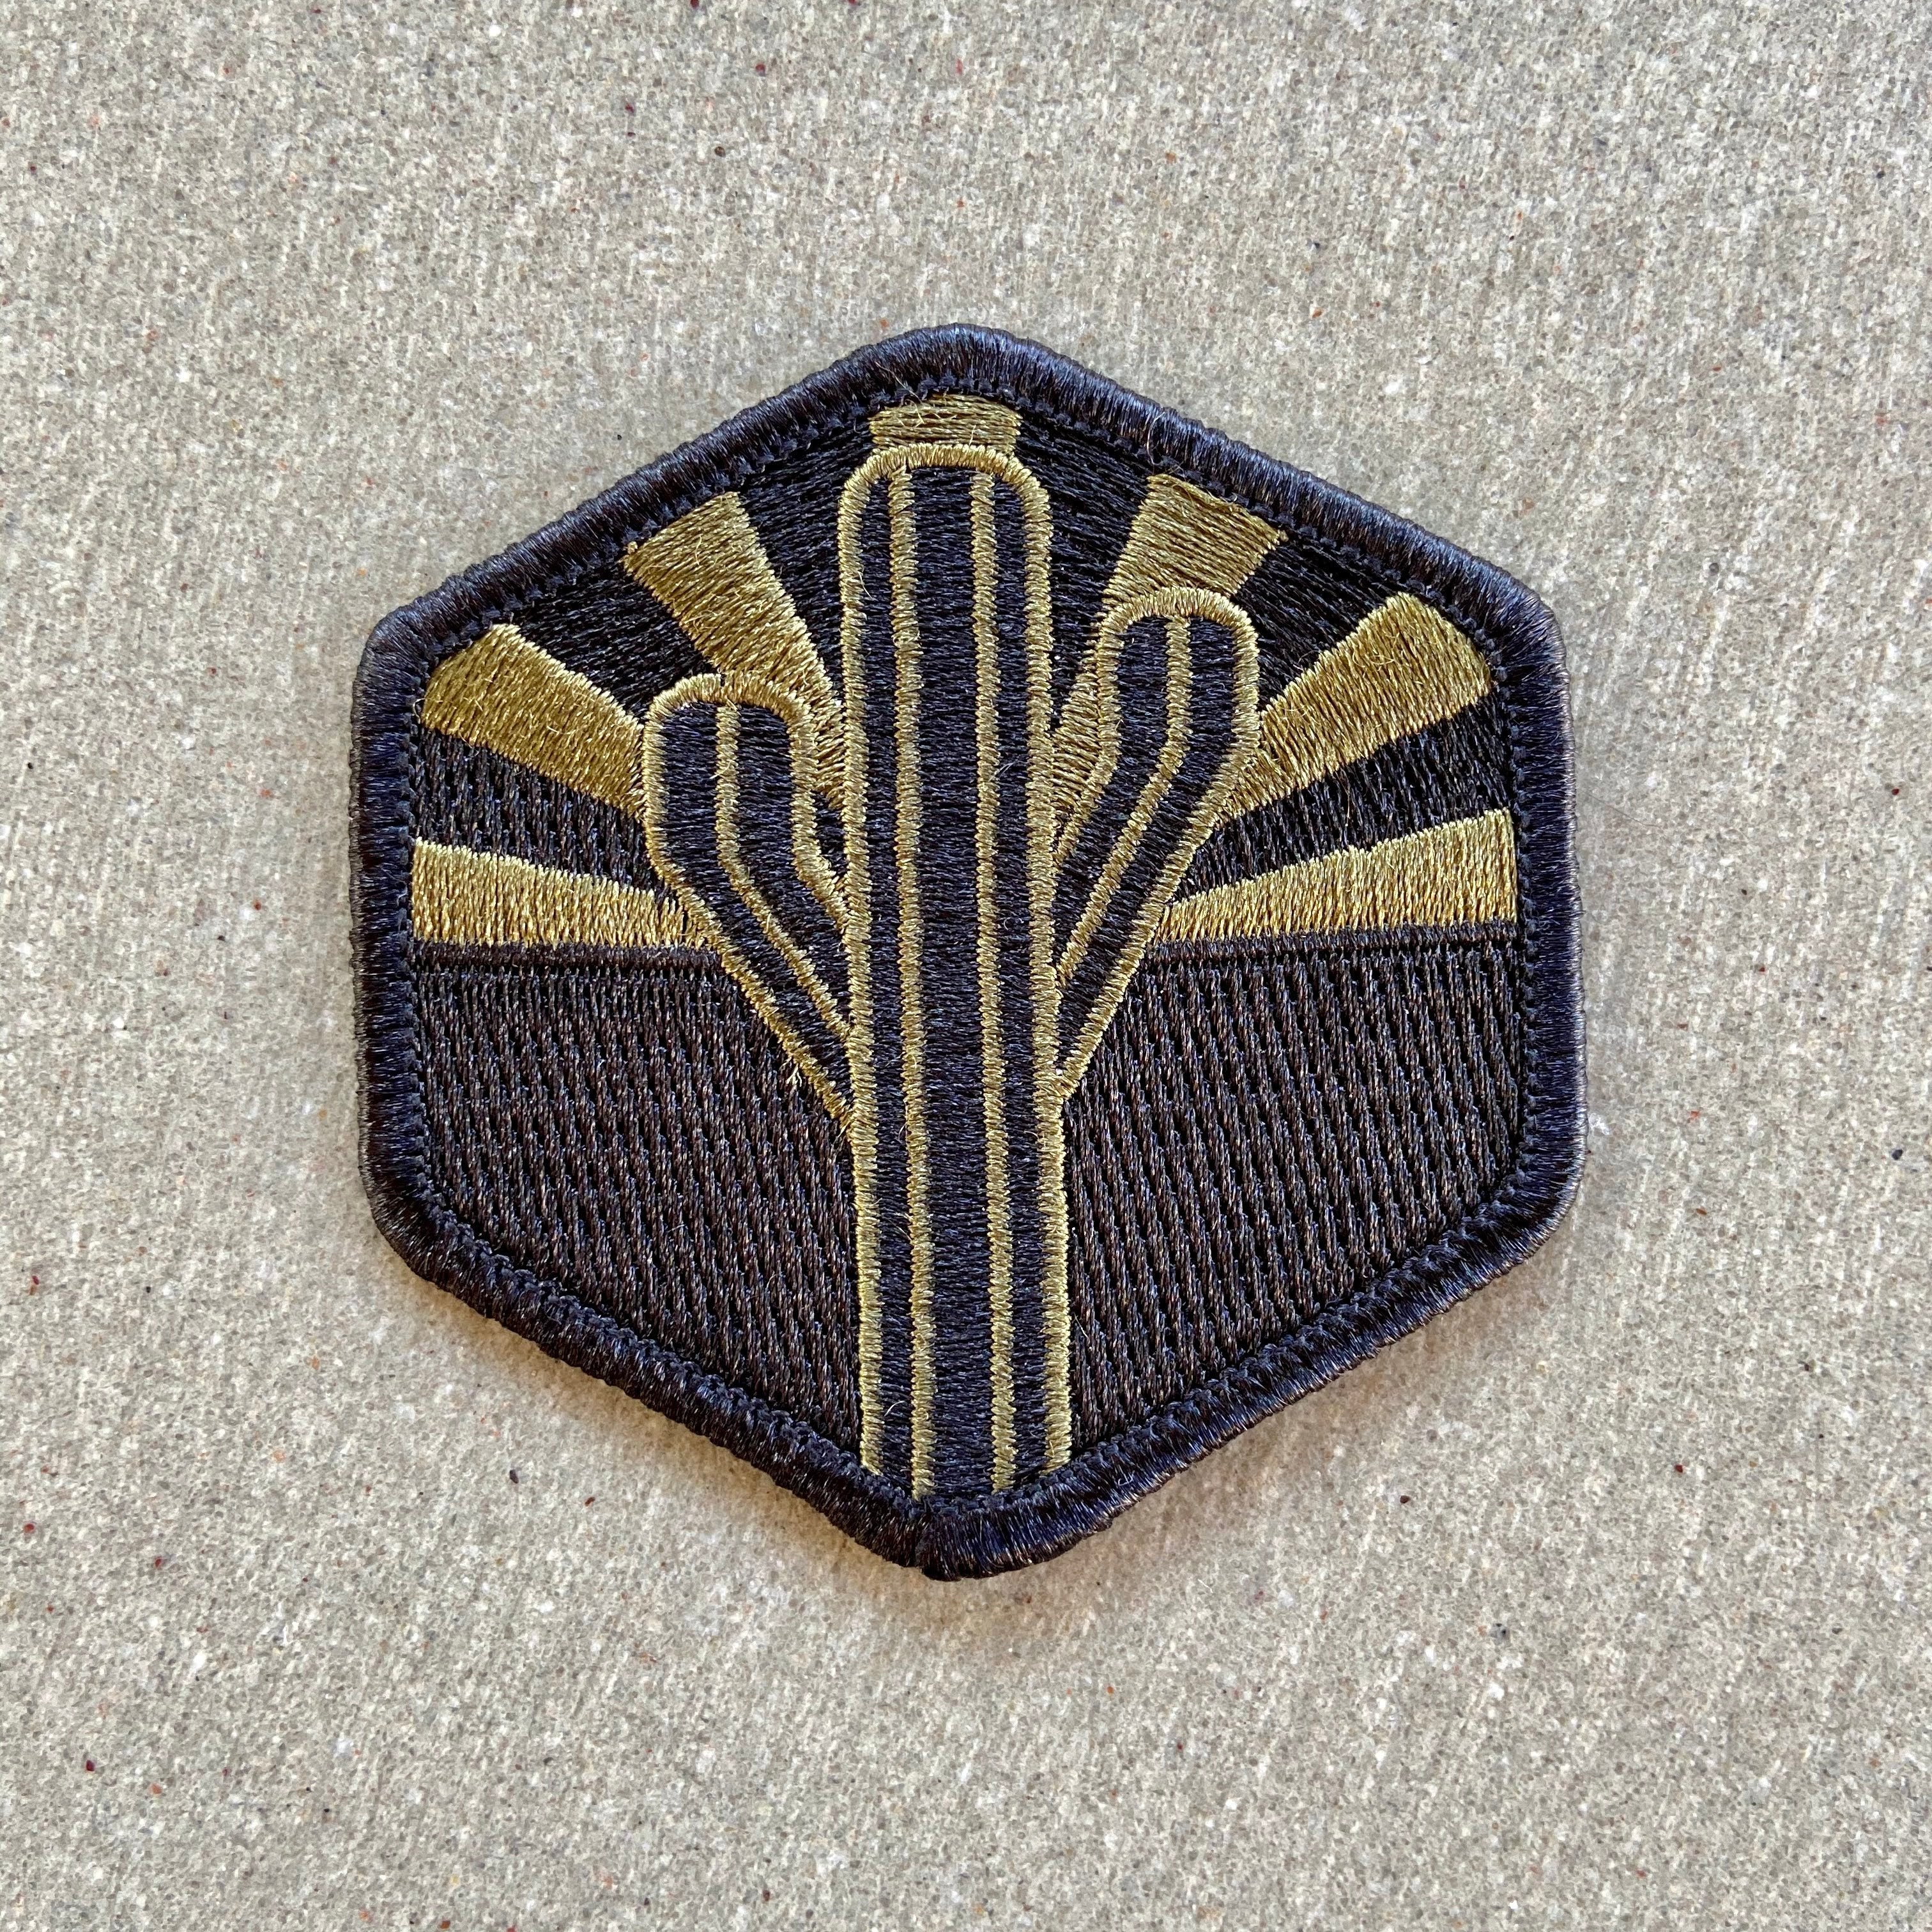 The Military Sentinel Patch